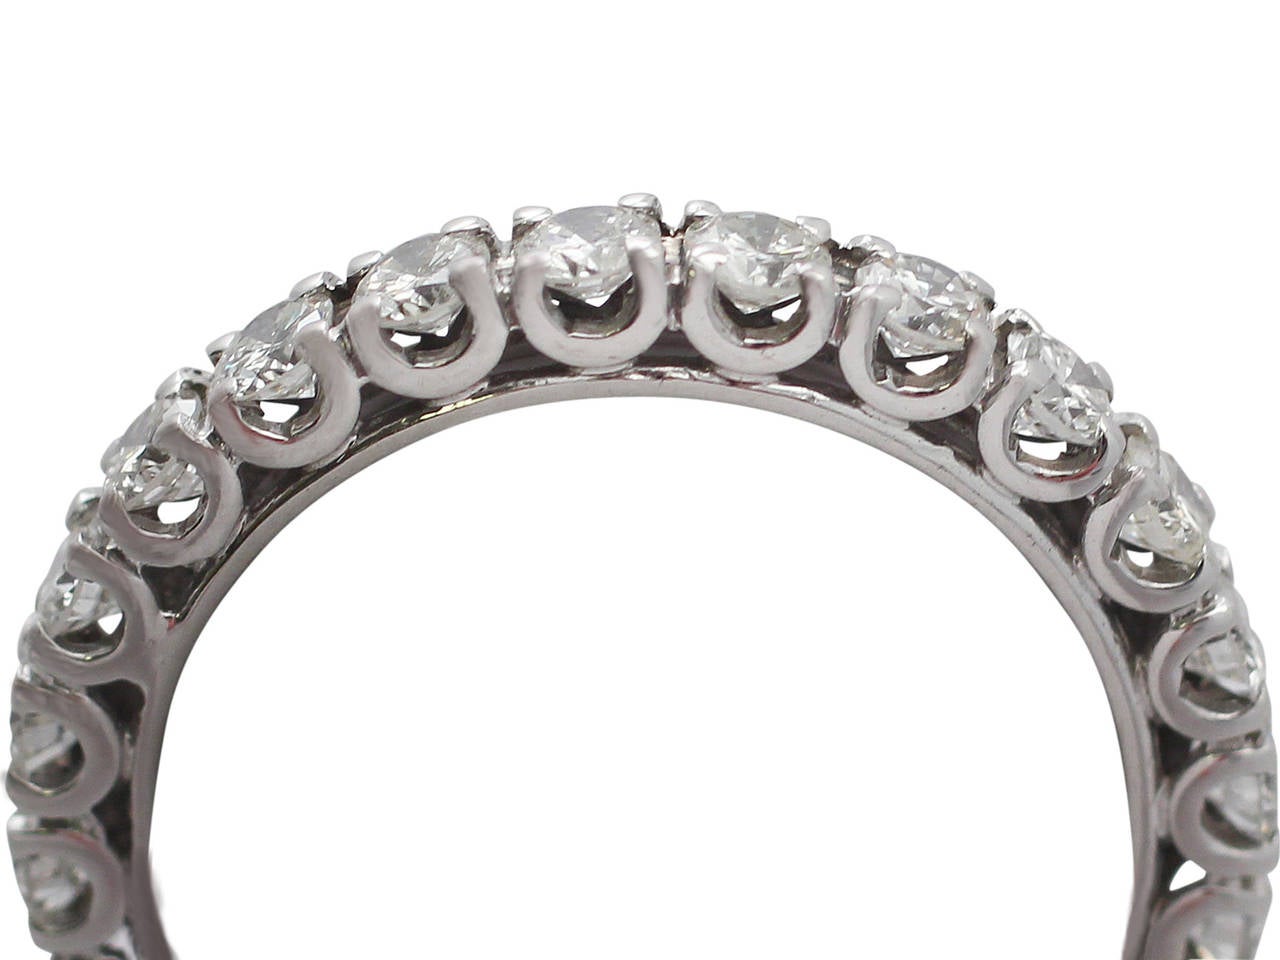 A fine and impressive vintage 1.76 carat diamond and 18 karat white gold full eternity ring; part of our vintage jewelry and estate jewelry collection

This vintage full diamond eternity ring has been crafted in 18k white gold.

The ring